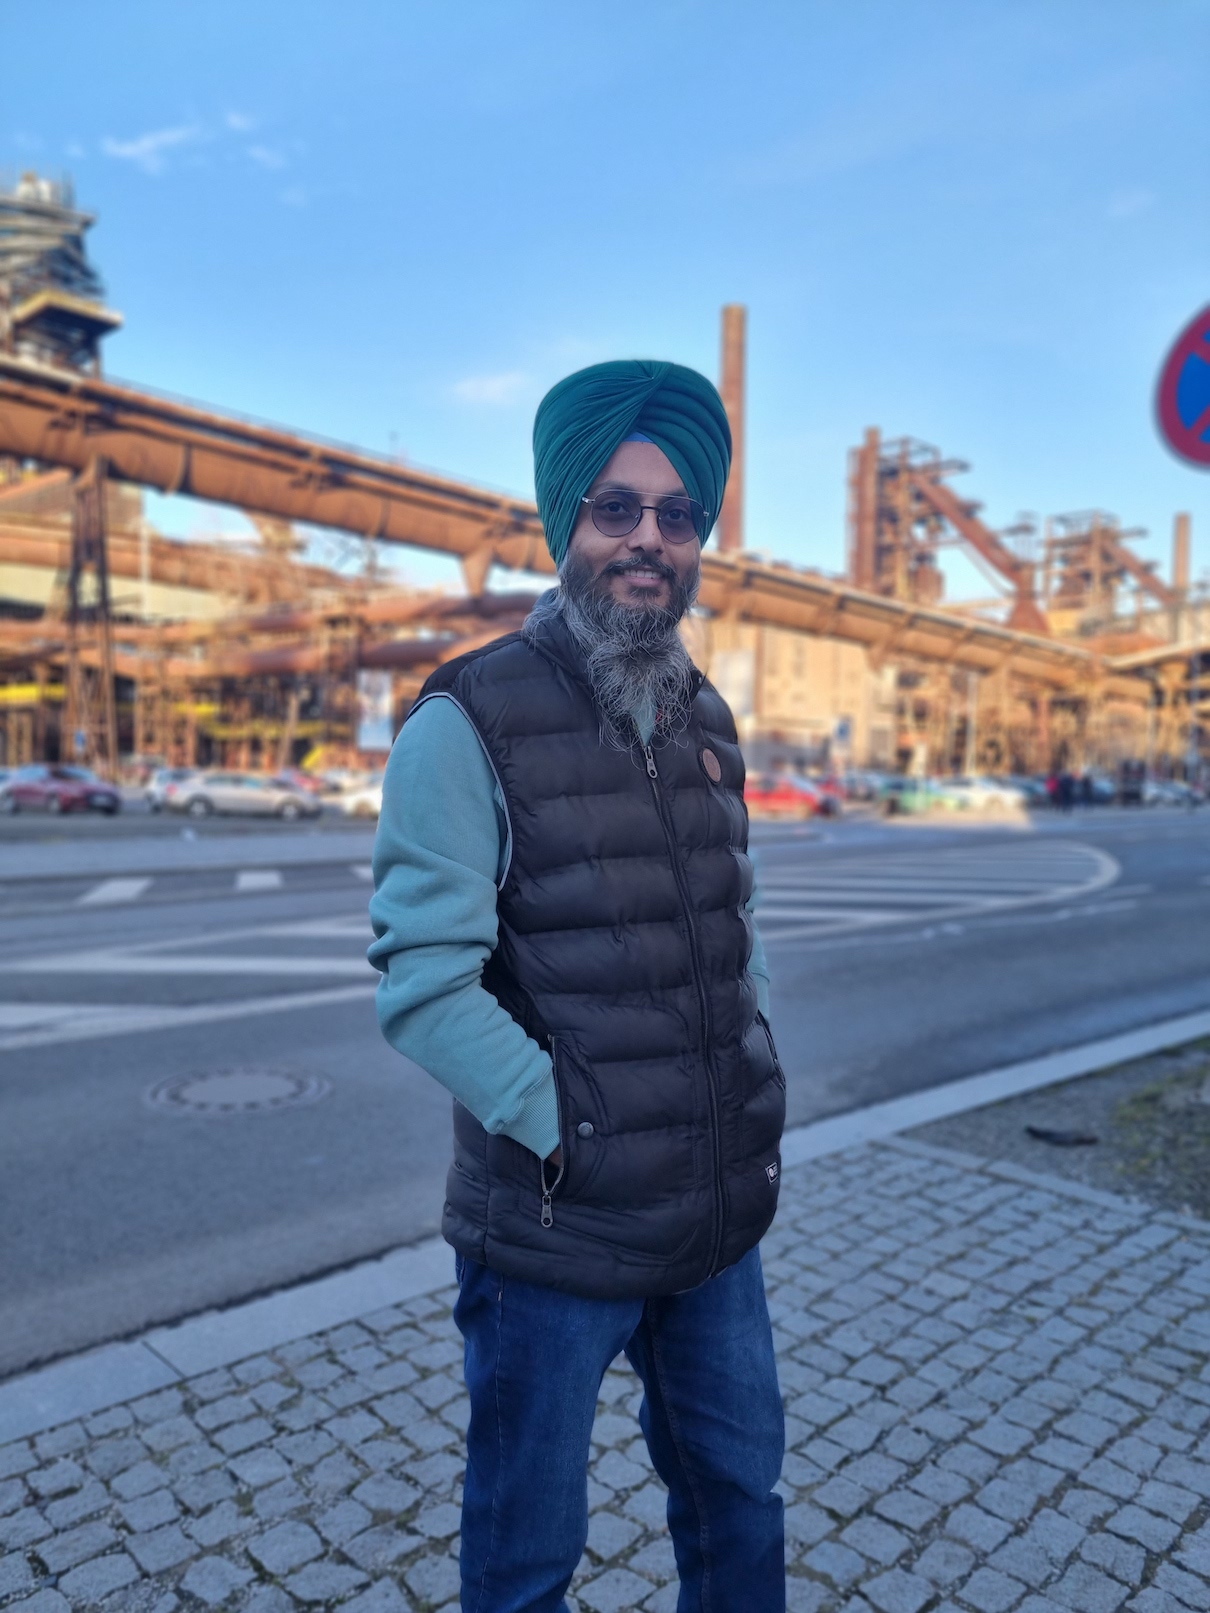 INTERVIEW WITH SAPHALDEEP SINGH KUNDIL FROM THE DUBAI BRANCH